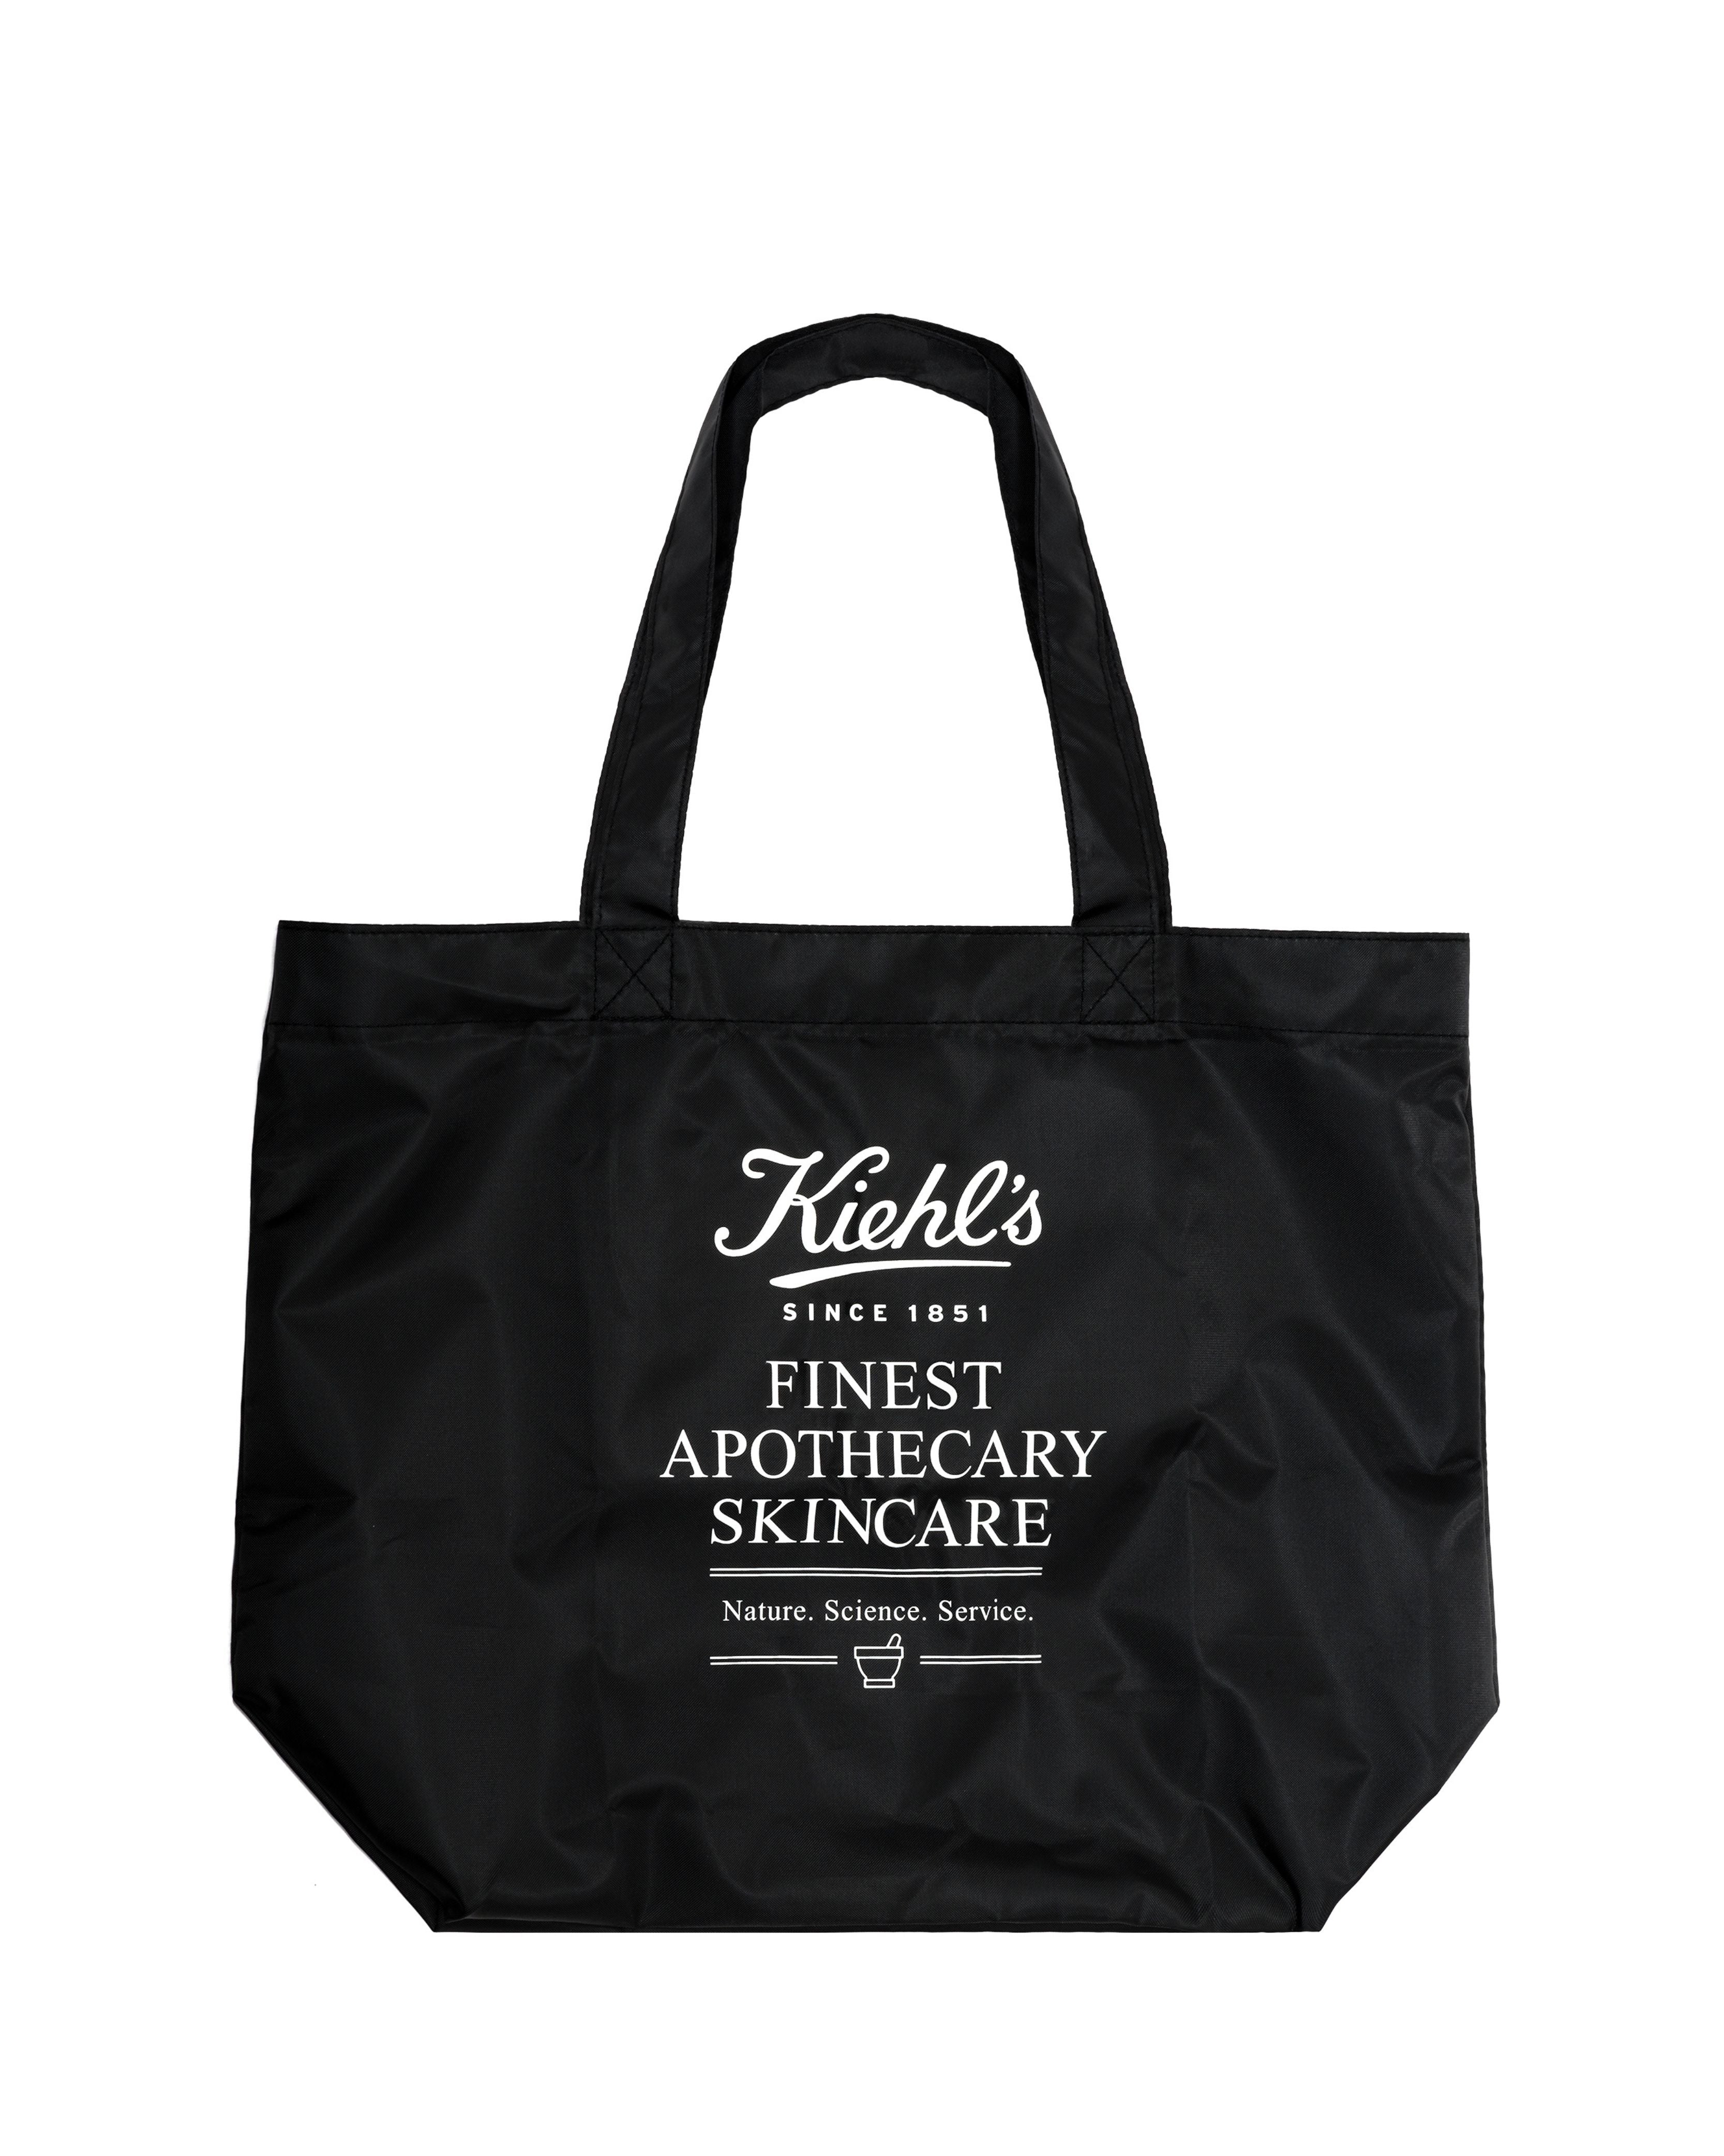 TANGS - Support the Children's Cancer Foundation by bringing home a $3  Kiehl's Loves Singapore tote bag with any Kiehl's Loves Singapore purchase!  TANGS members will enjoy an additional deluxe size product